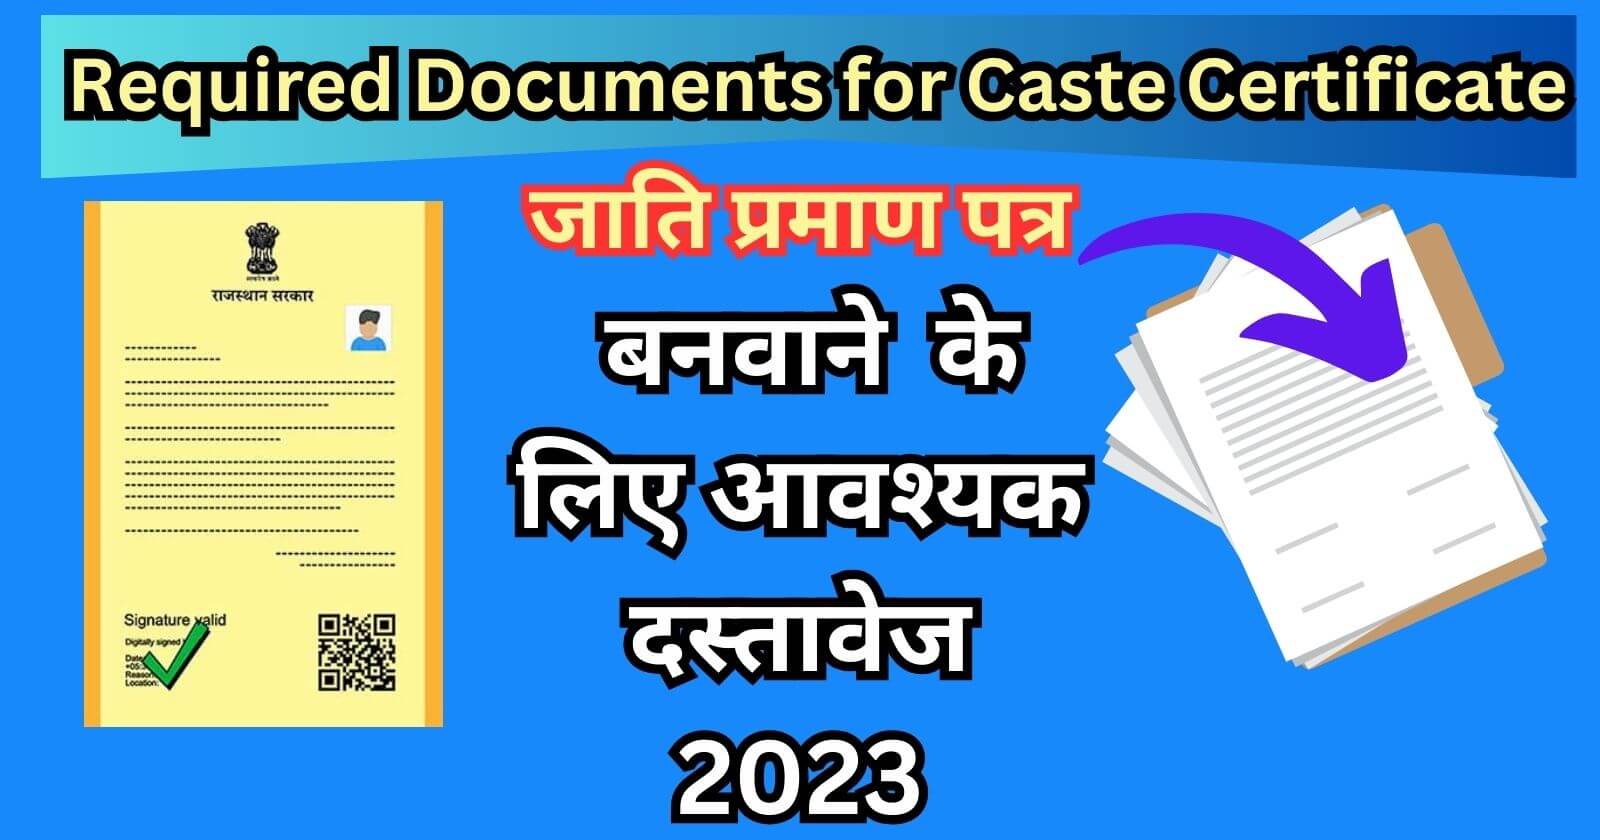 Required Documents for Caste Certificate